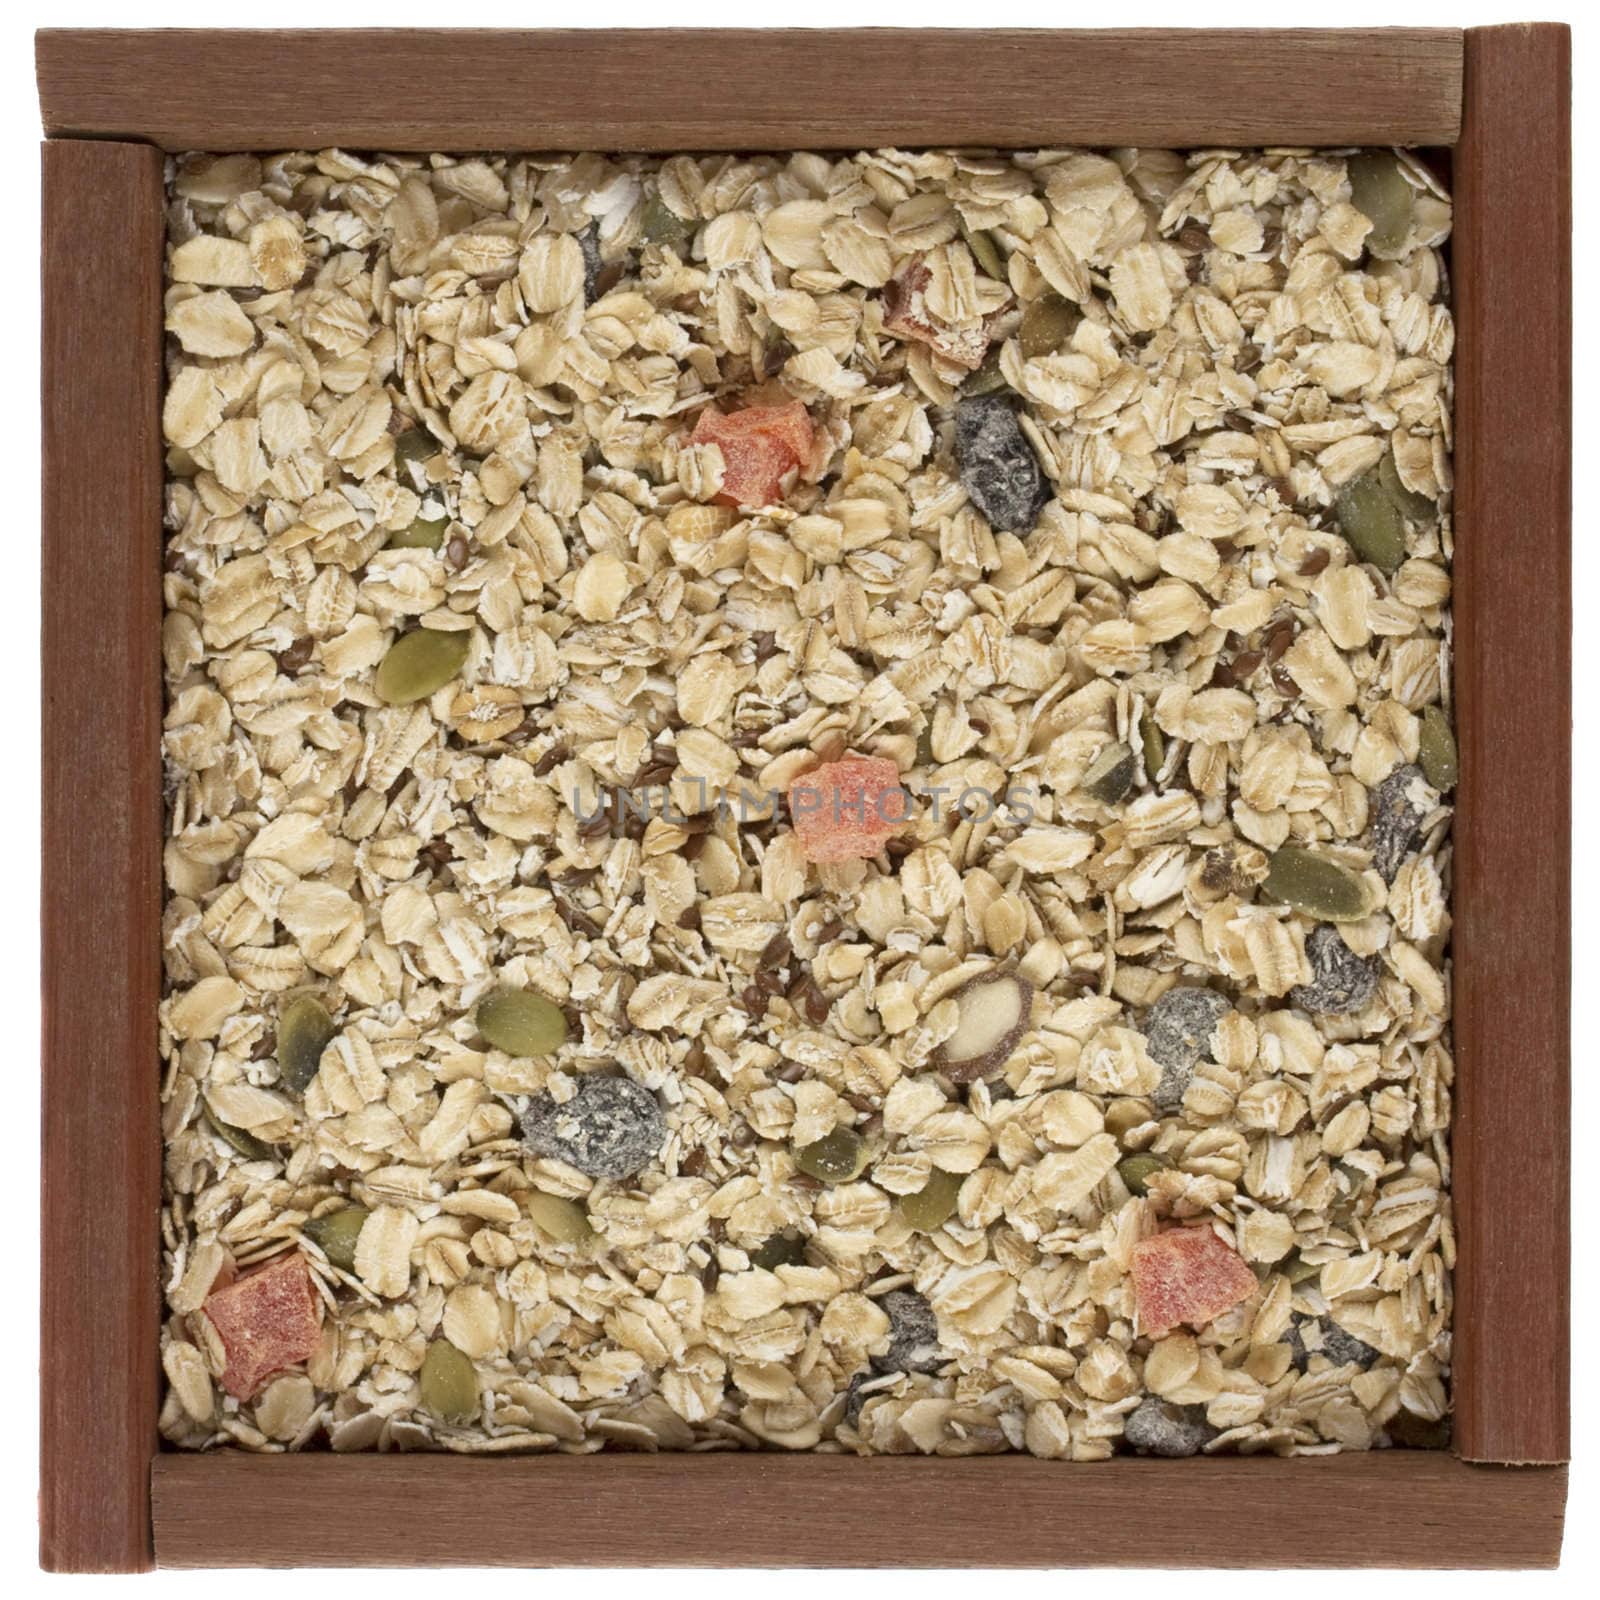 muesli cereal in a wooden box  by PixelsAway